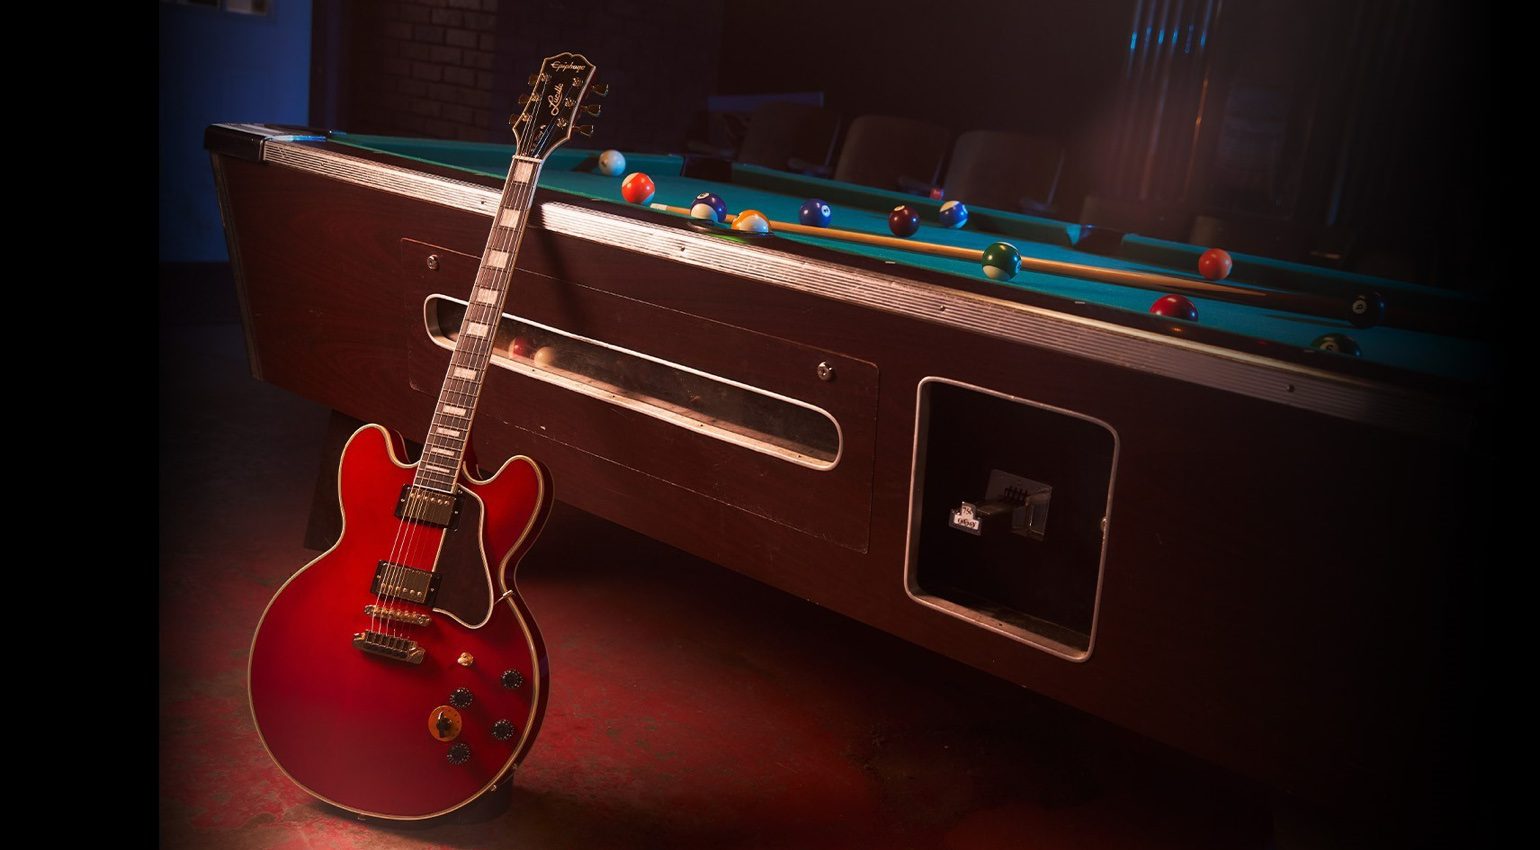 Epiphone drops new limited B.B. King Lucille Cherry and Bone White models -  gearnews.com